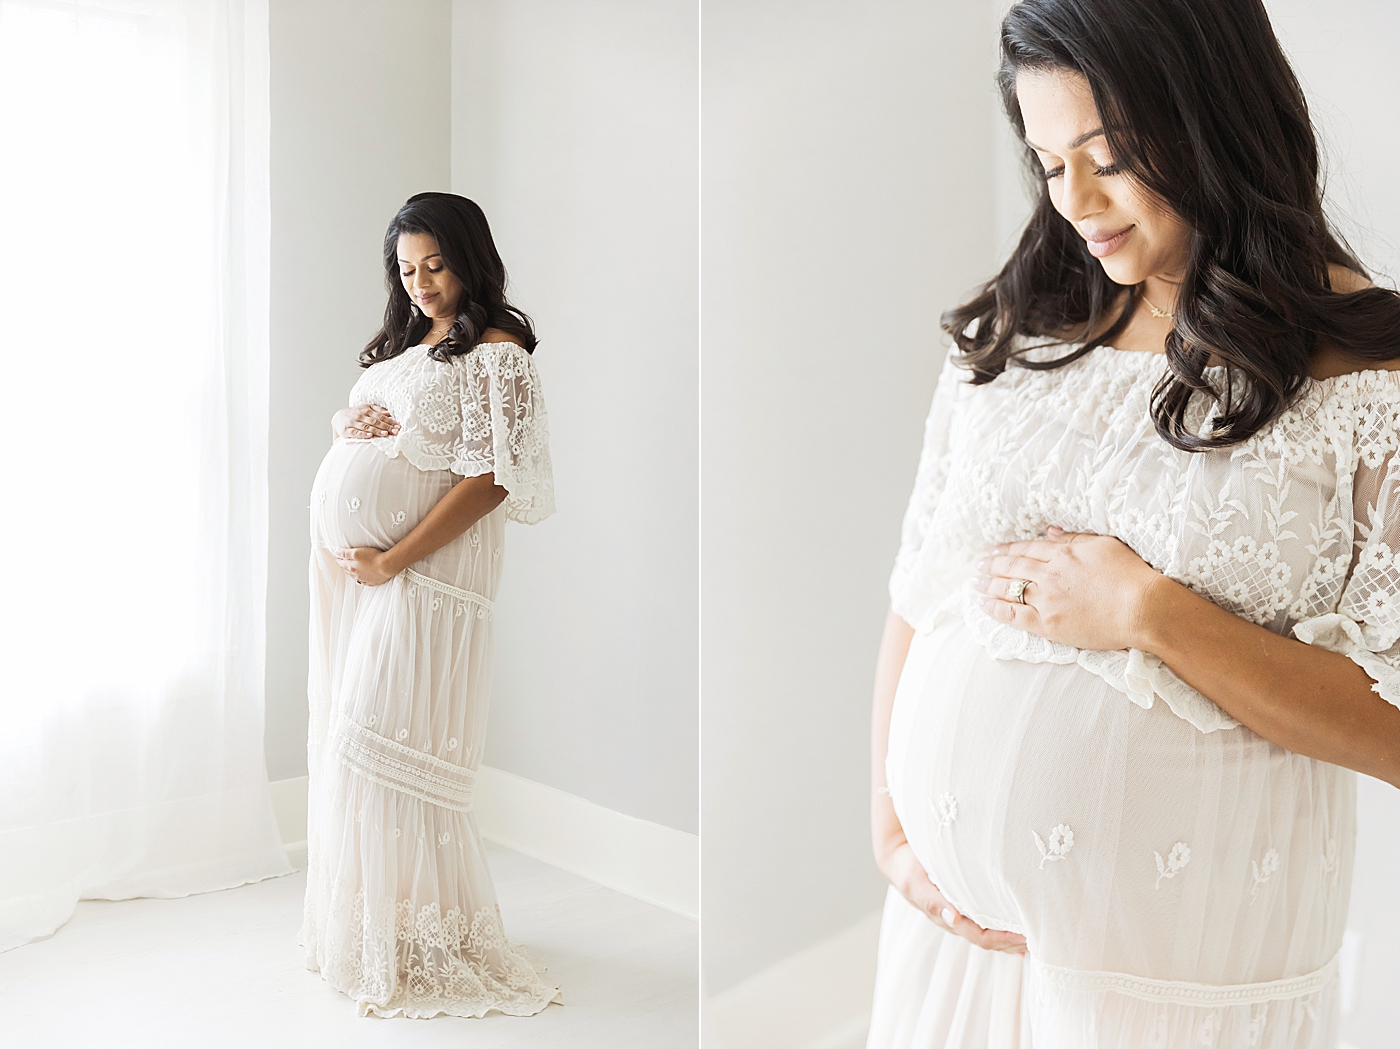 Maternity photoshoot for twin mama. Photo by Fresh Light Photography.